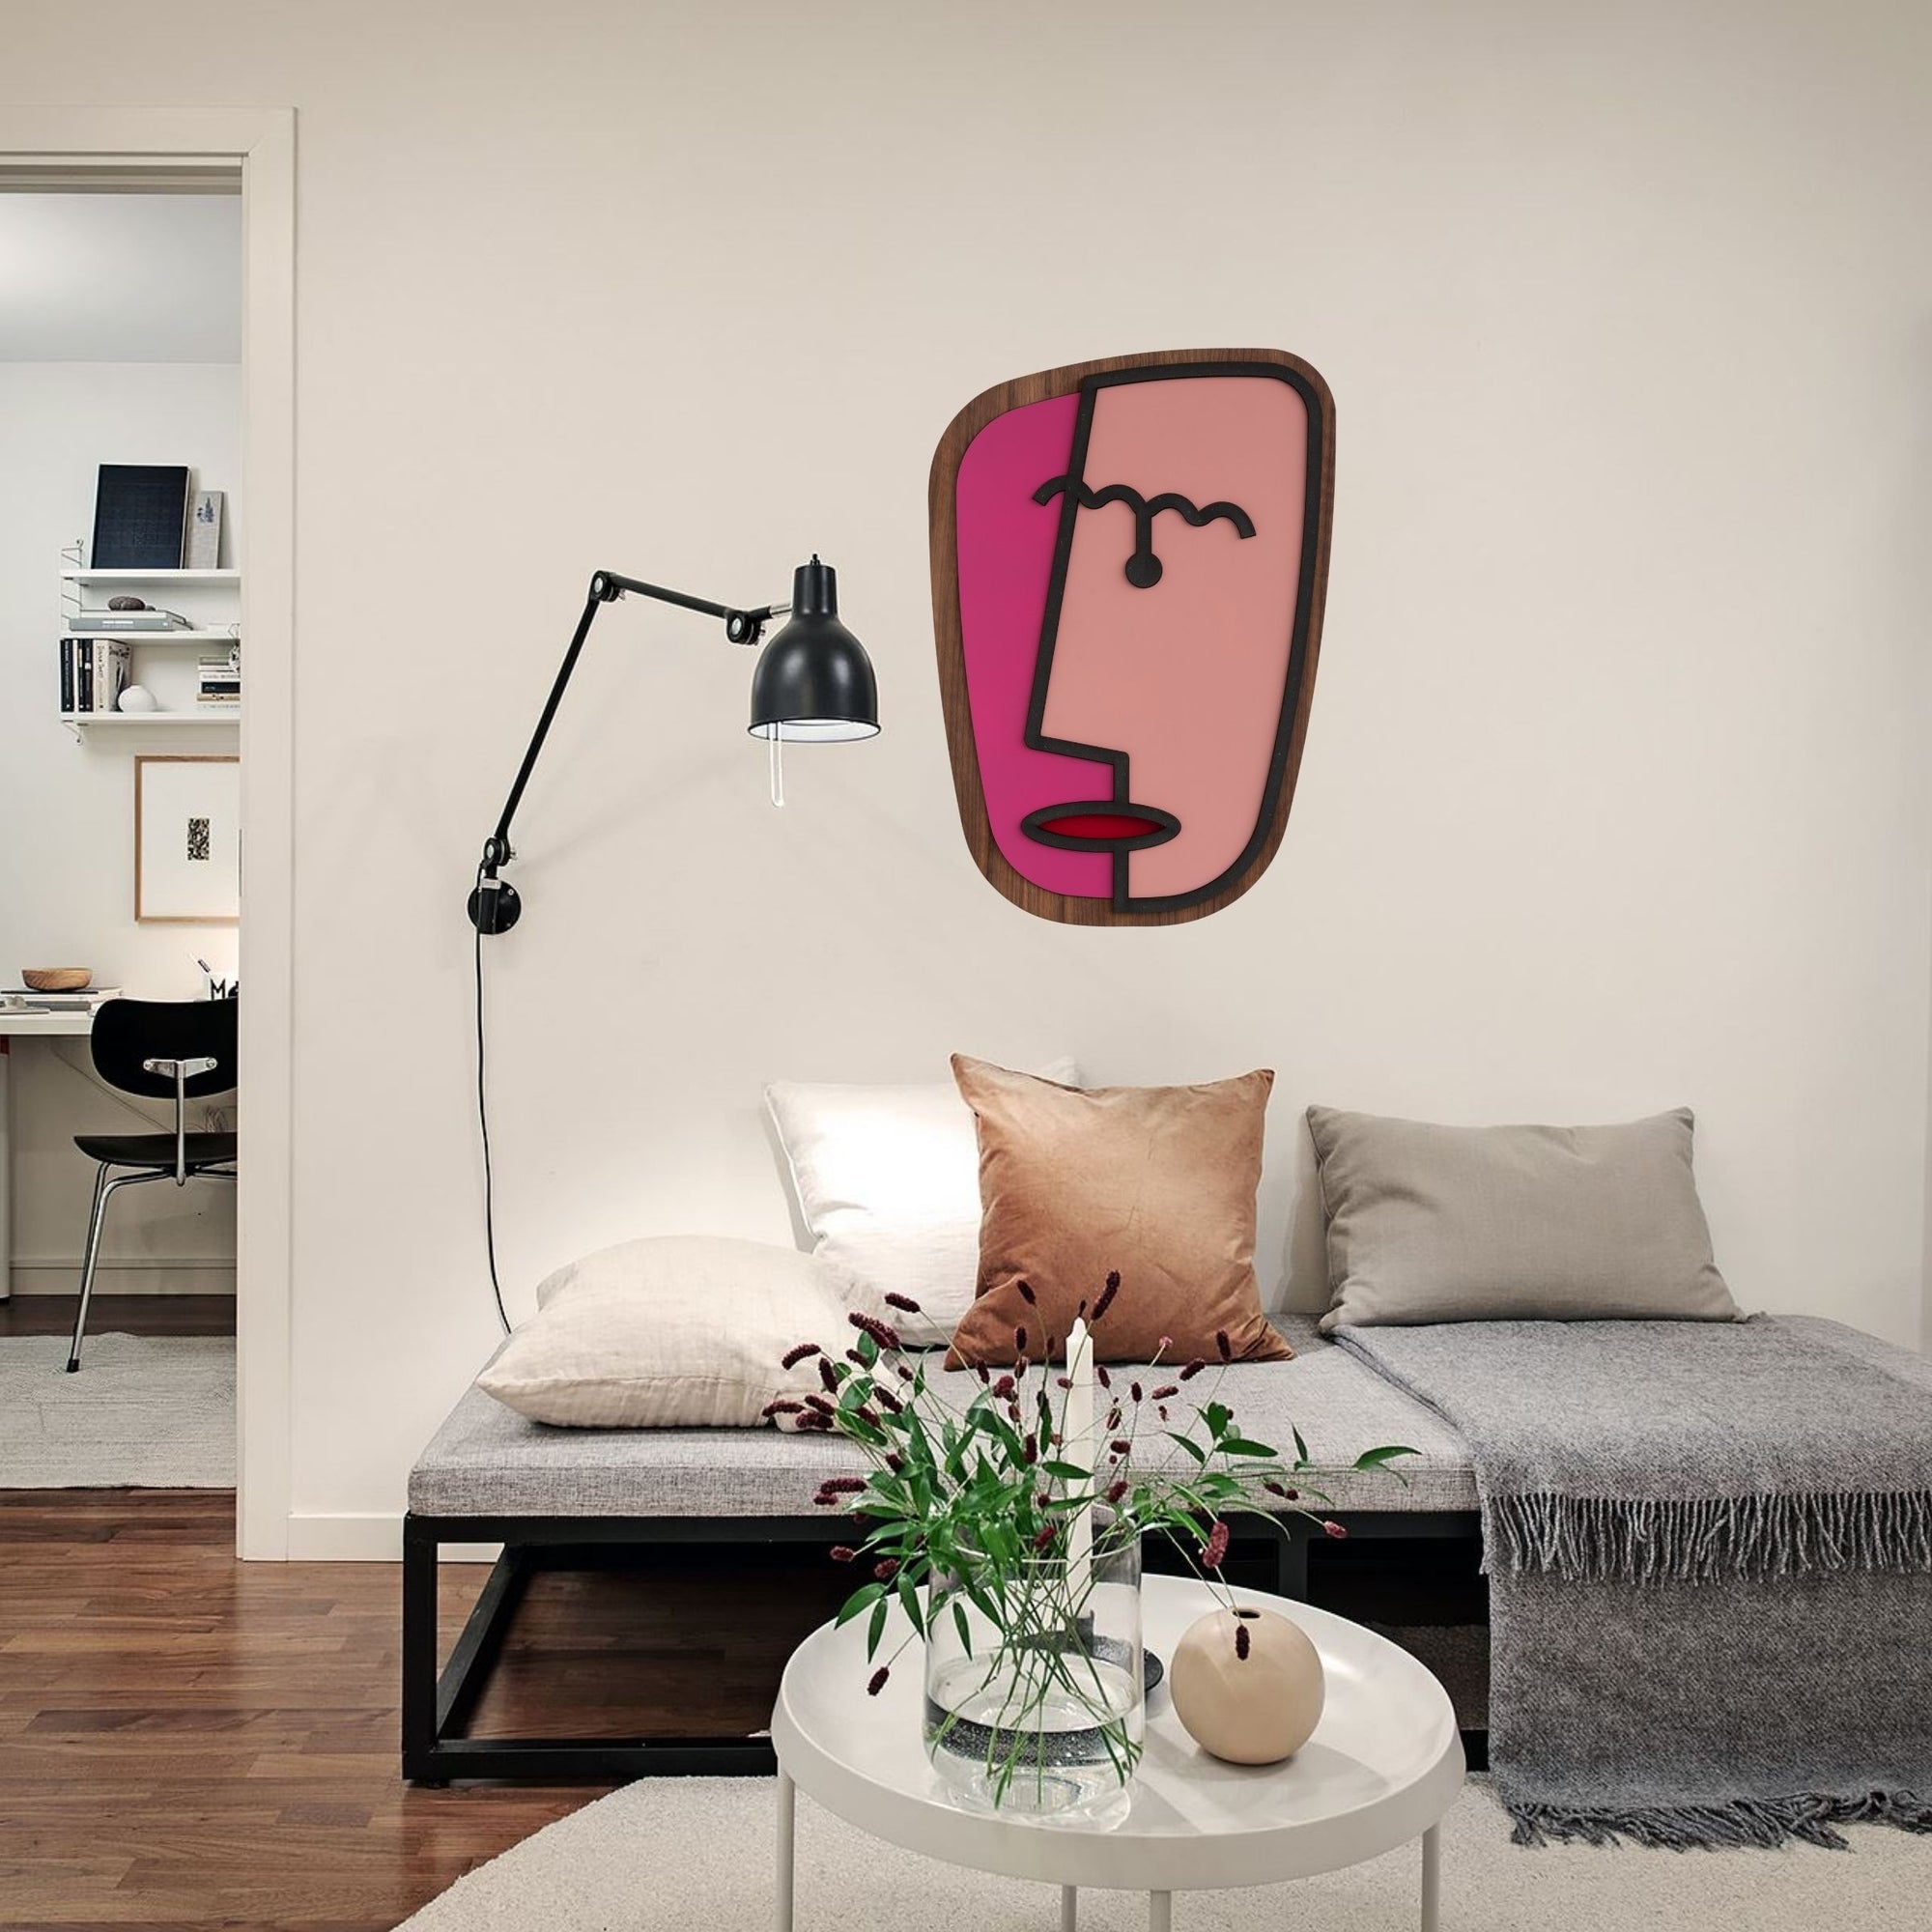 A Picasso line drawing is a unique and one-of-a-kind item of wall decor, especially for those who like themselves and enjoy showing their personality